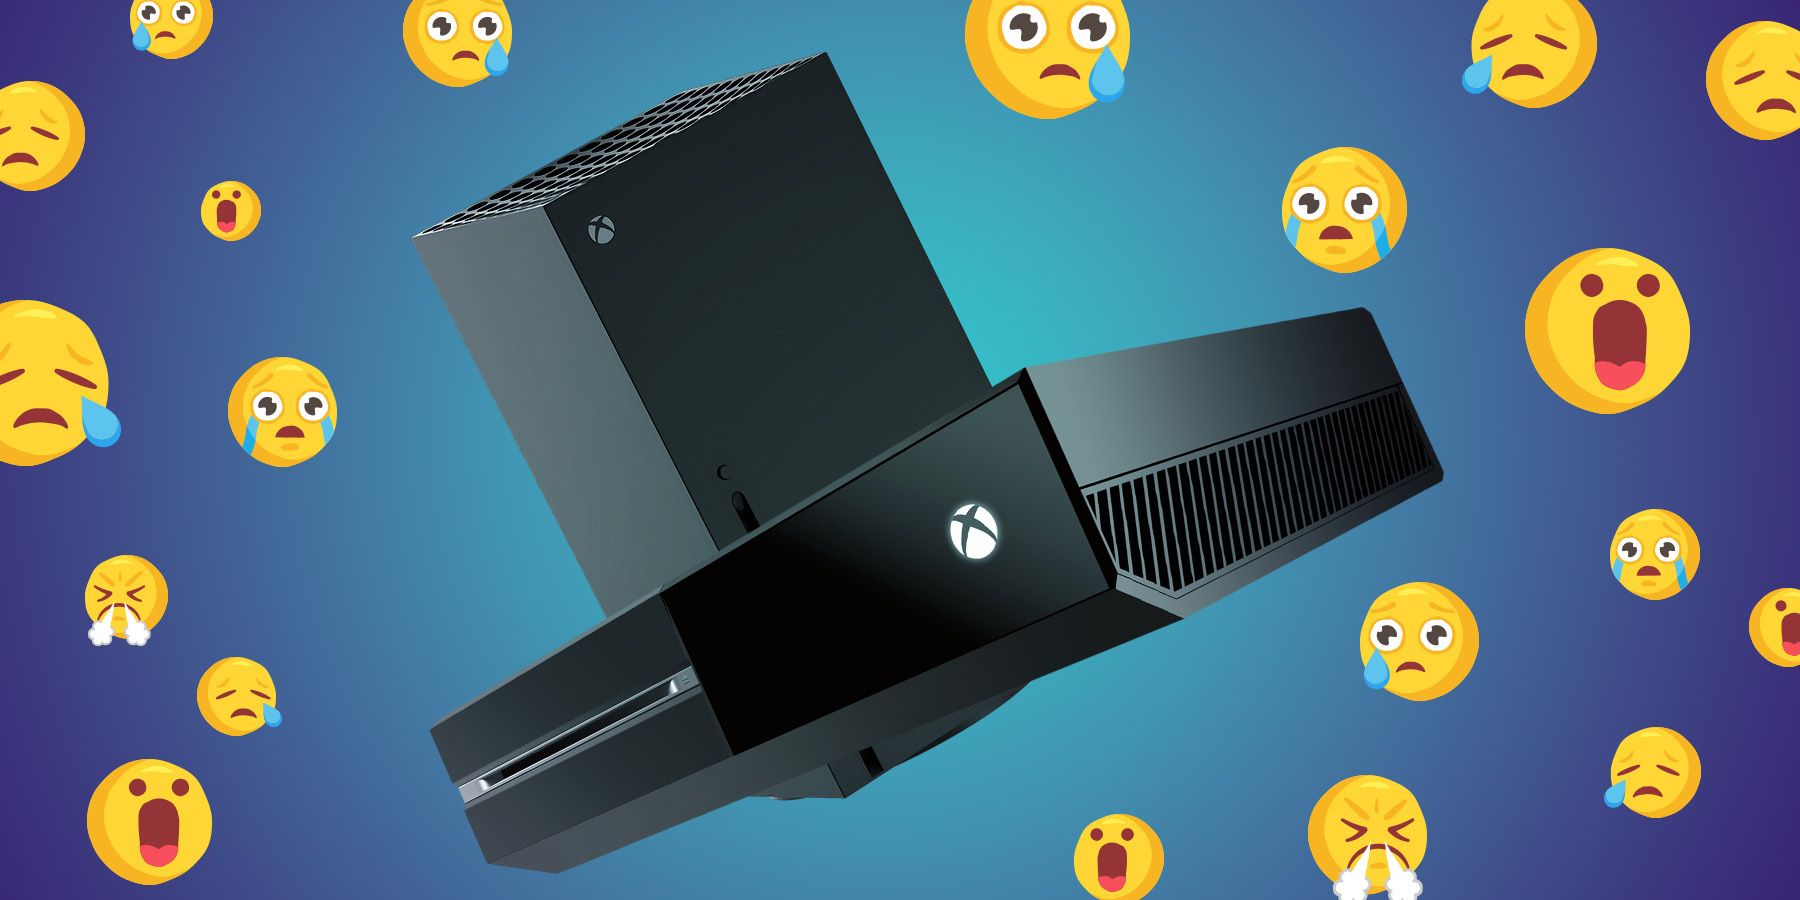 xbox consoles with crying emojis